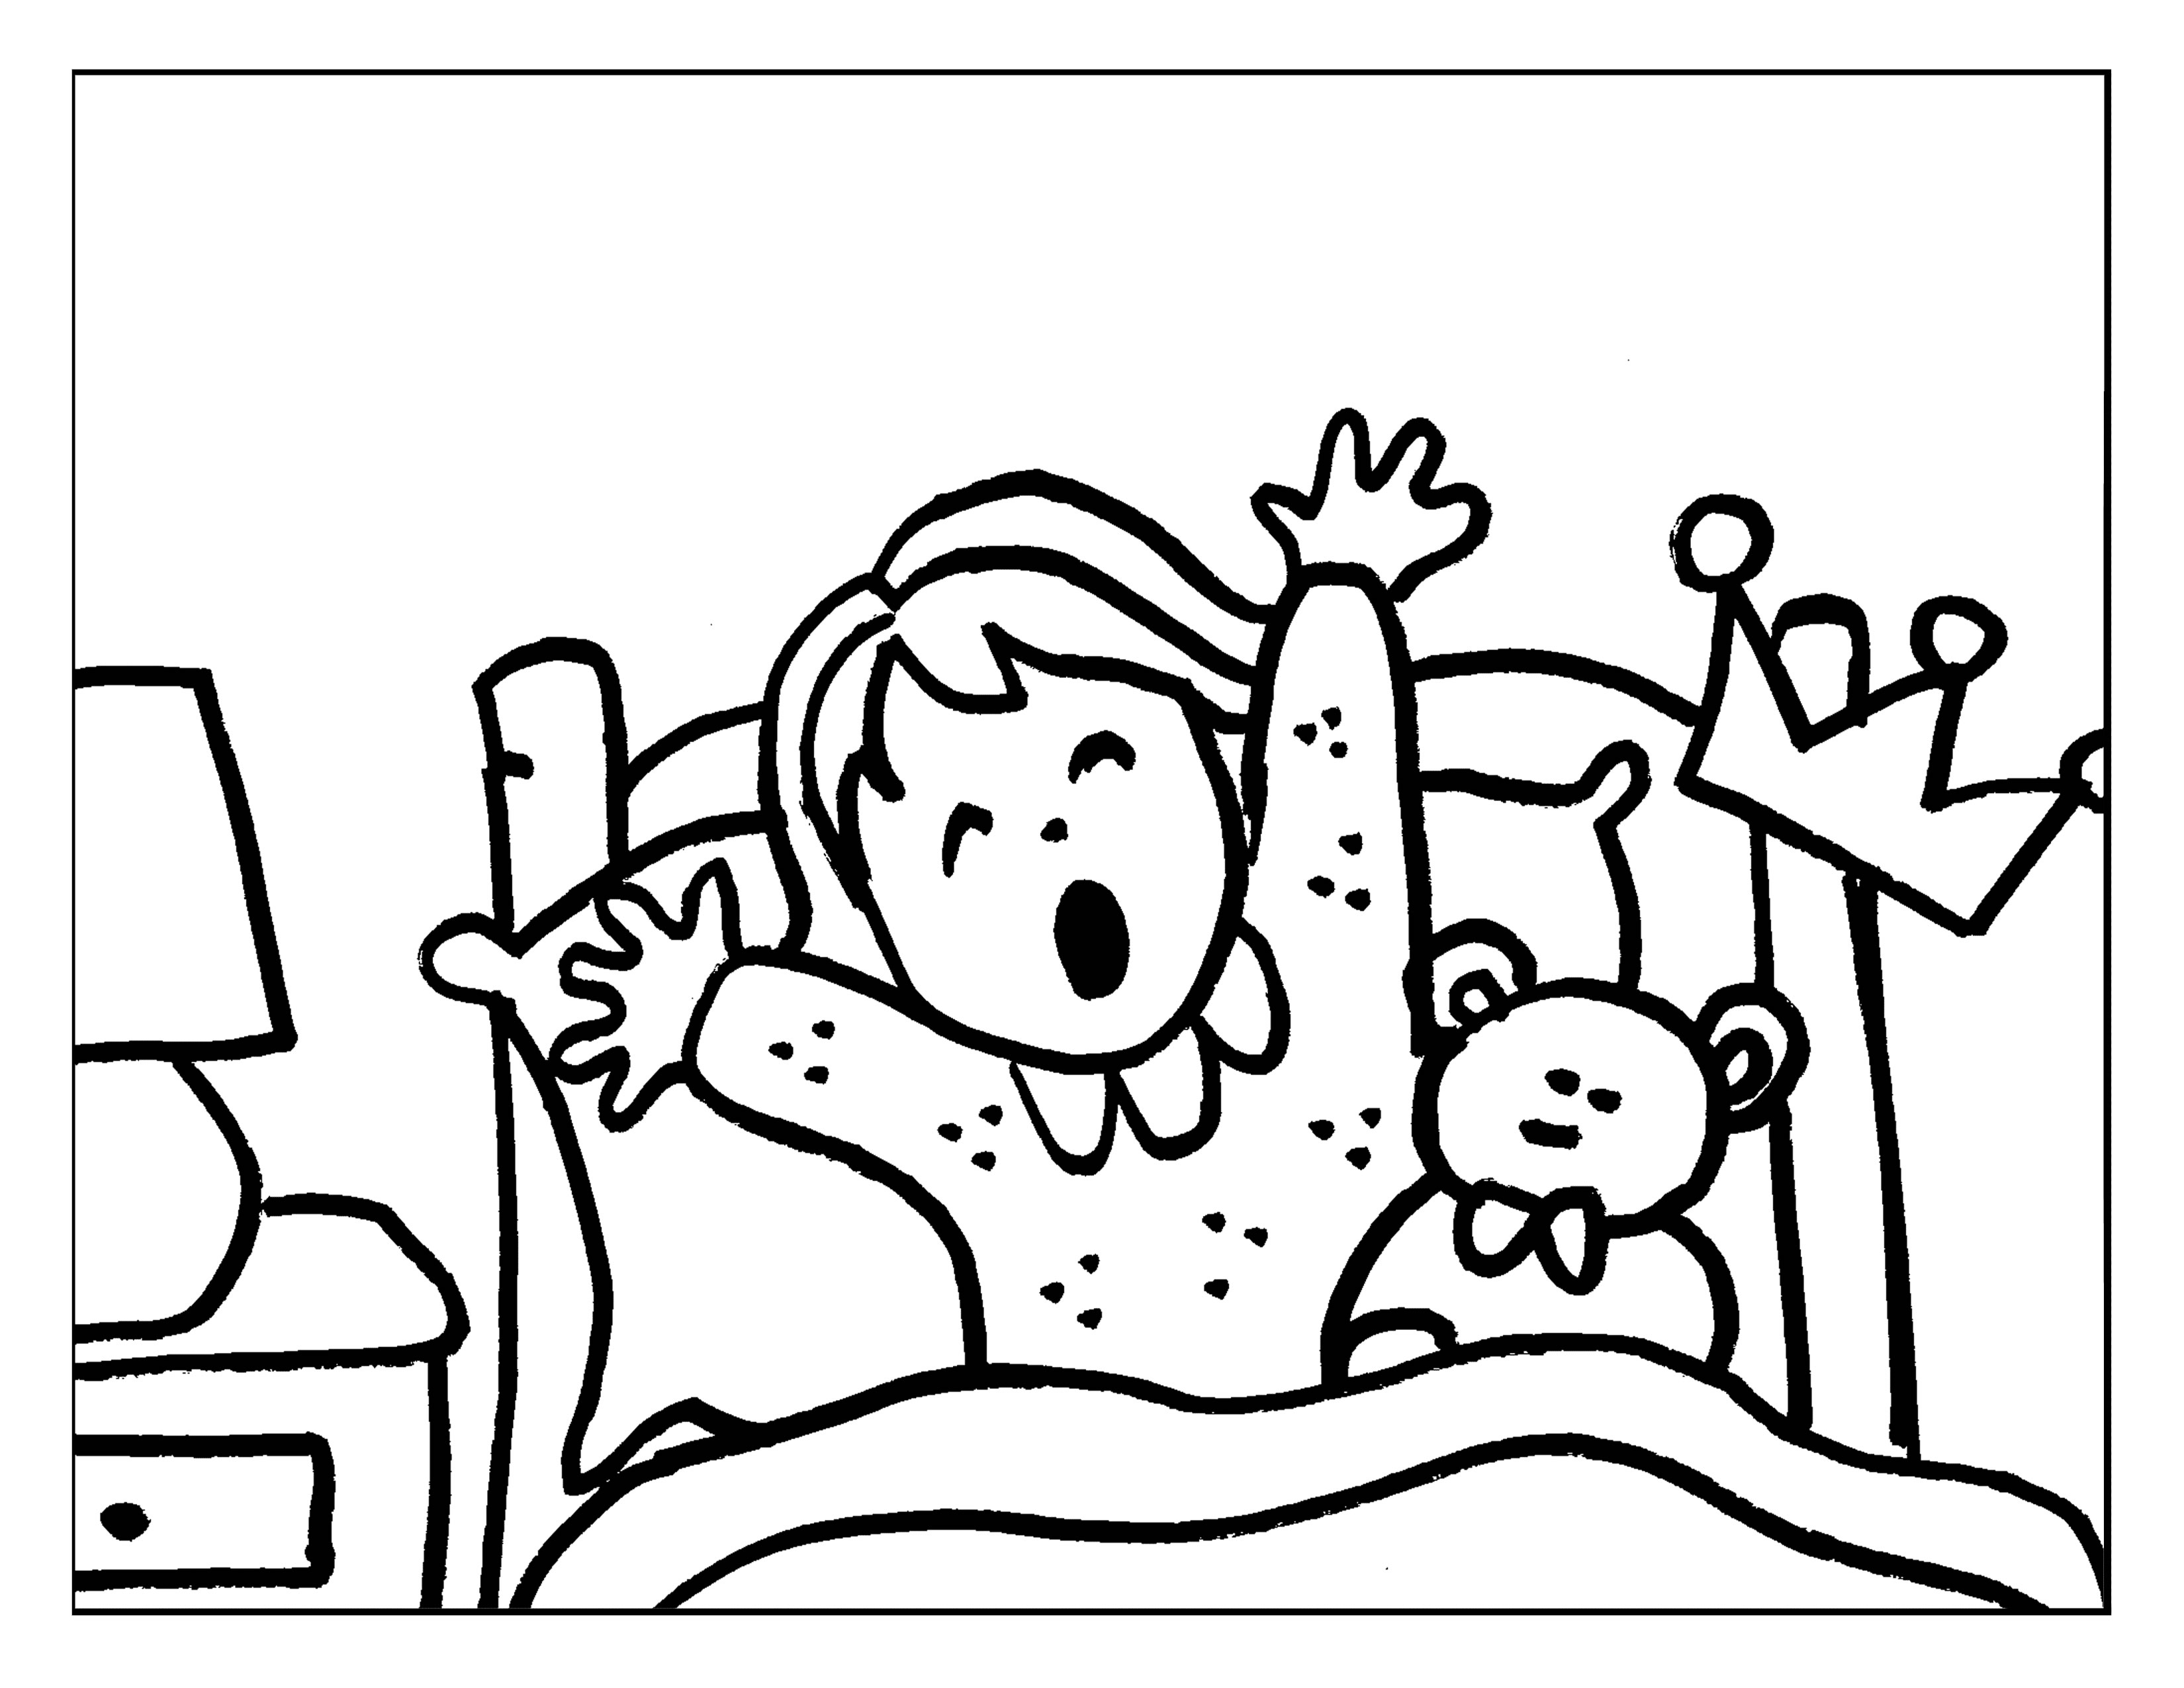 waking up clipart black and white free